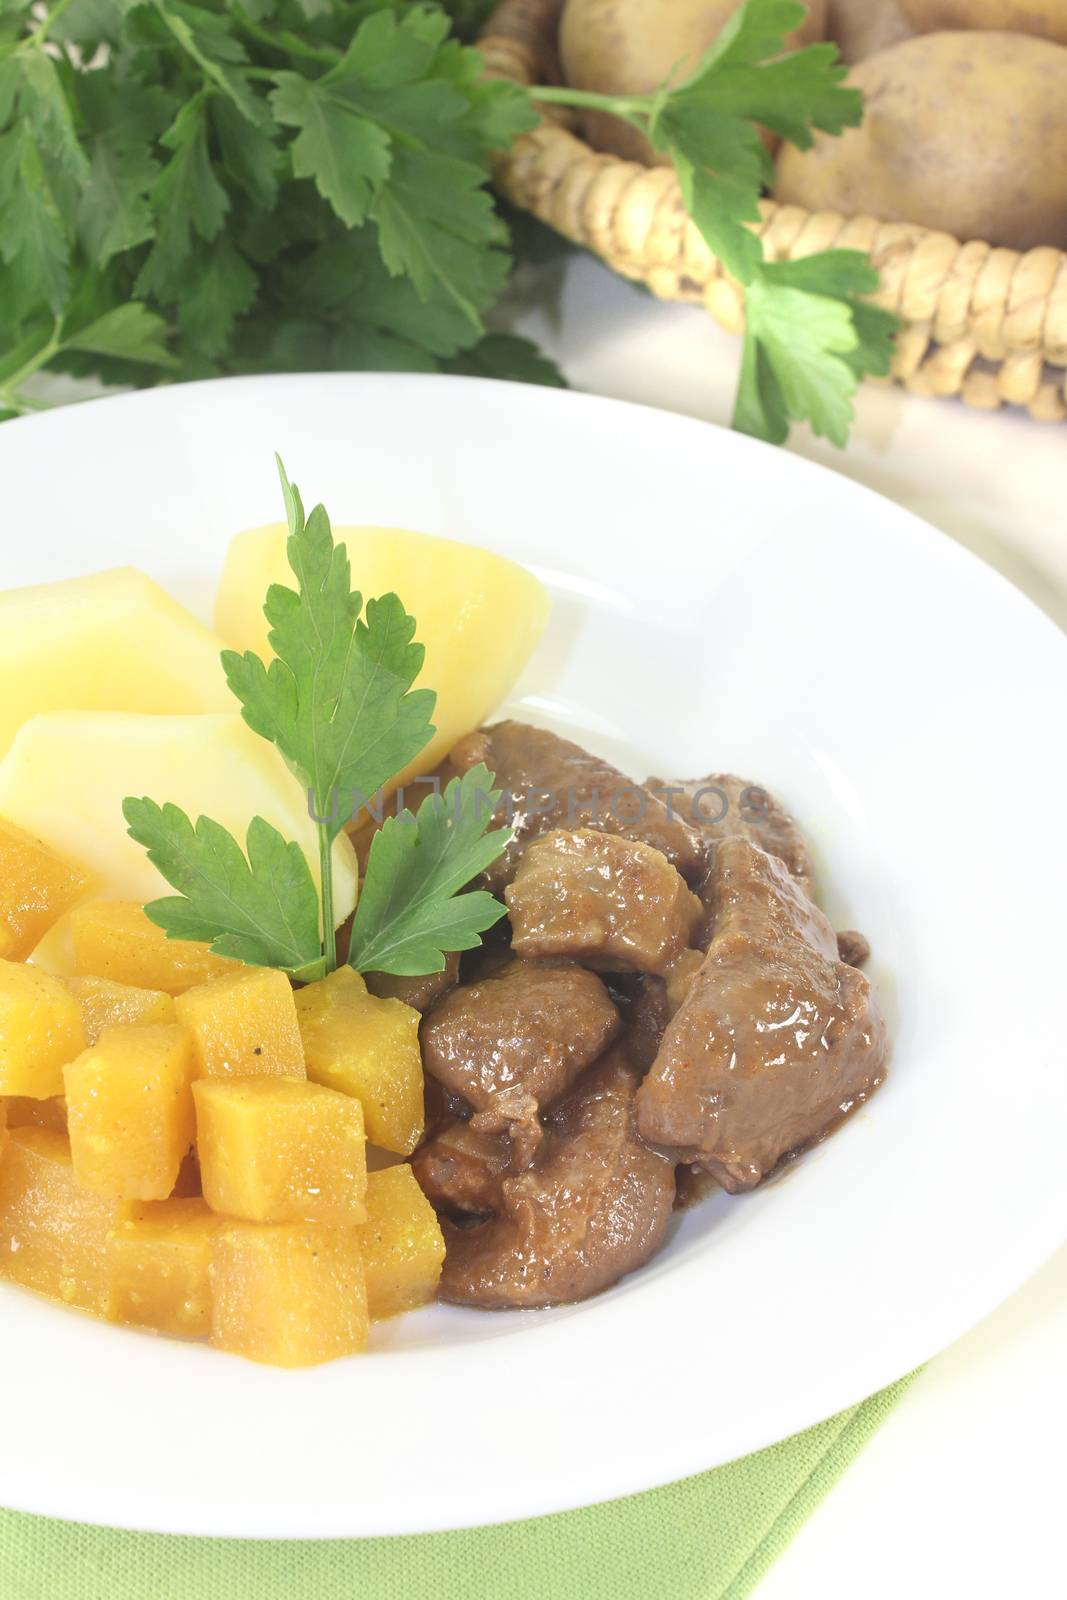 Venison goulash with turnip and parsley on a light background